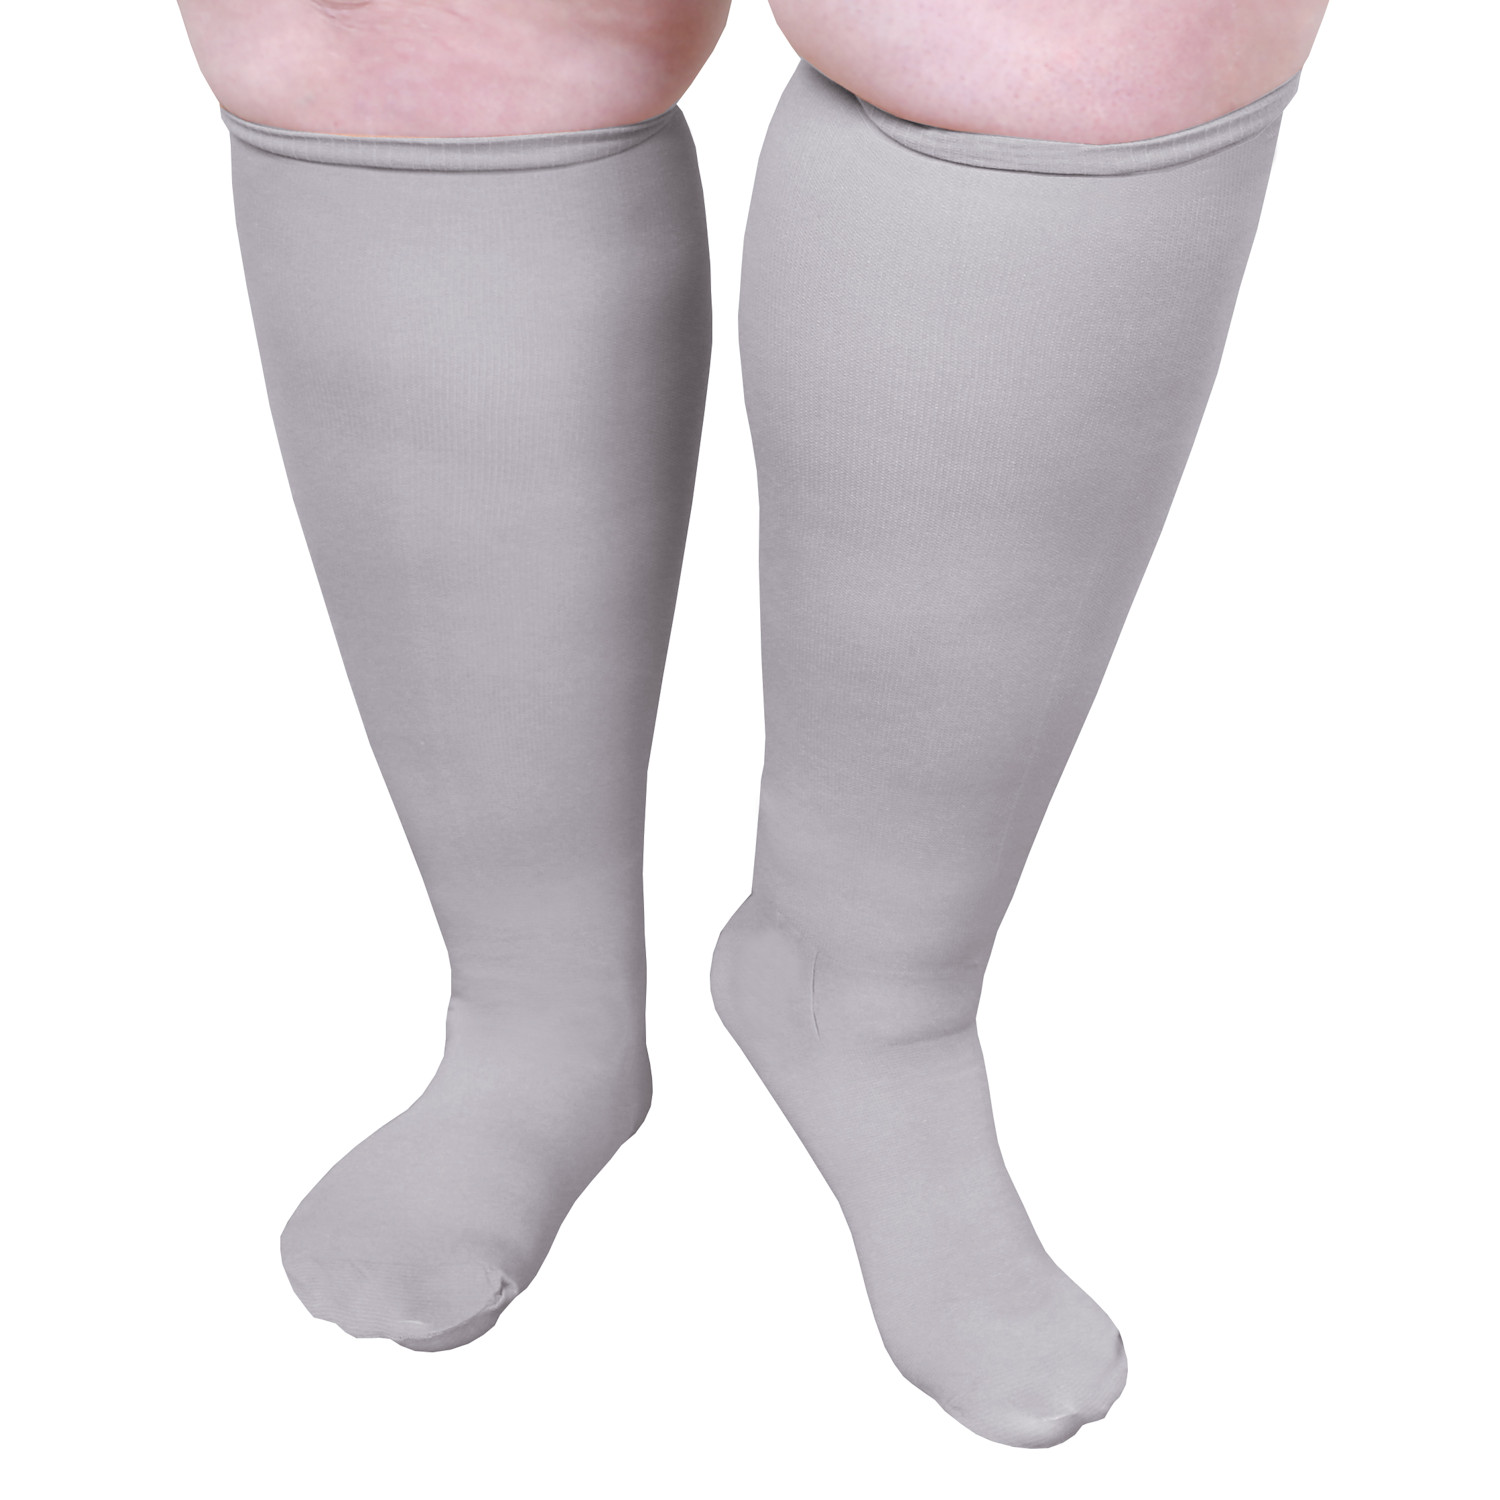 Extra Wide Calf Compression Socks Moderate Knee Highs Support Plus 